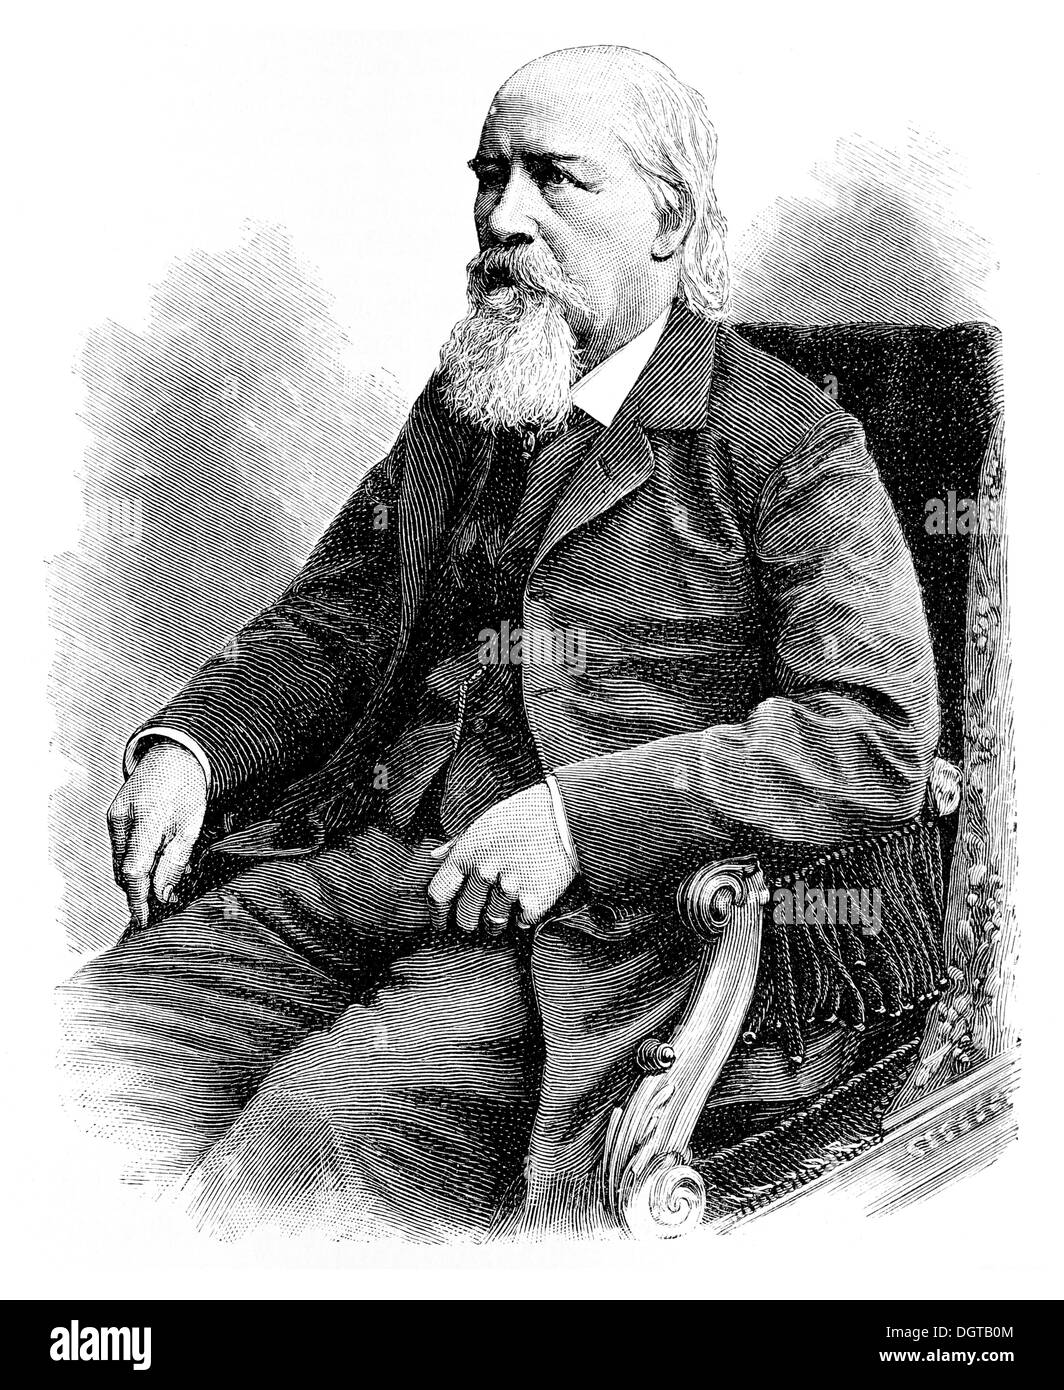 Emanuel Geibel in the year of his death, 1884, historic illustration from History of German Literature from 1885 Stock Photo